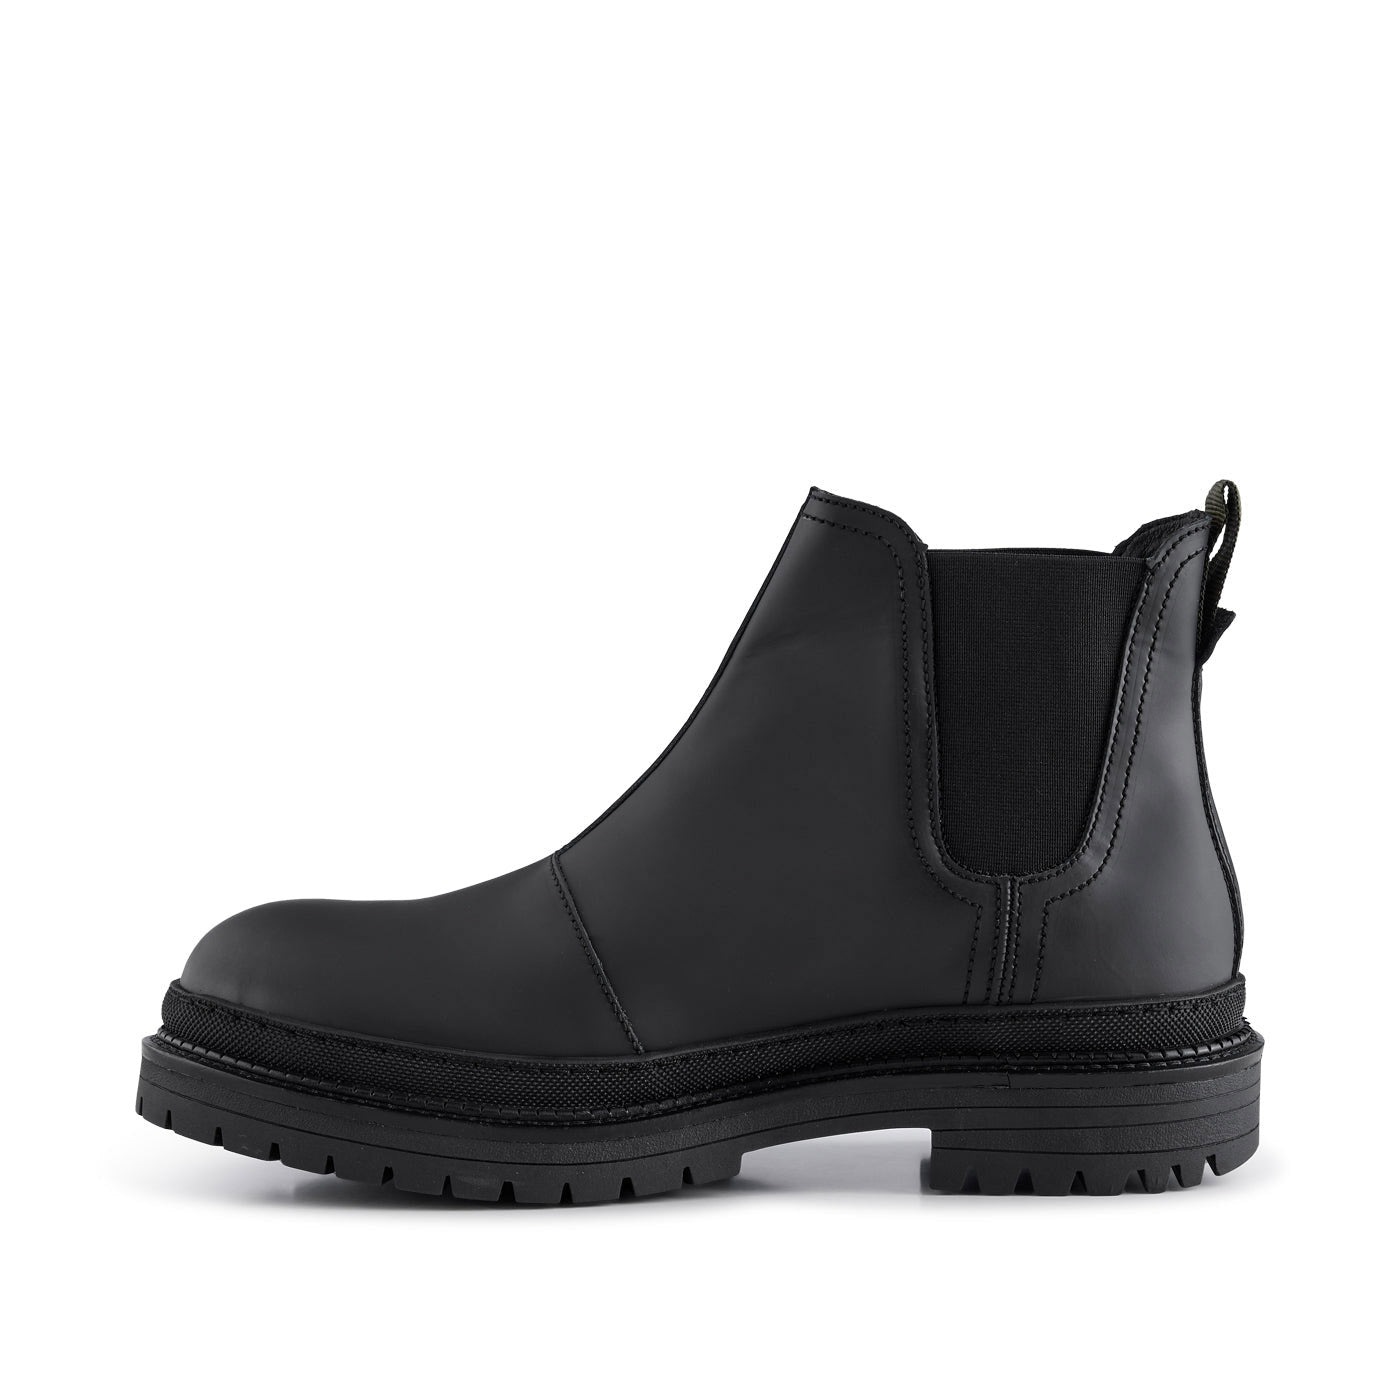 Arvid chelsea boot leather - BLACK – SHOE THE BEAR - COM